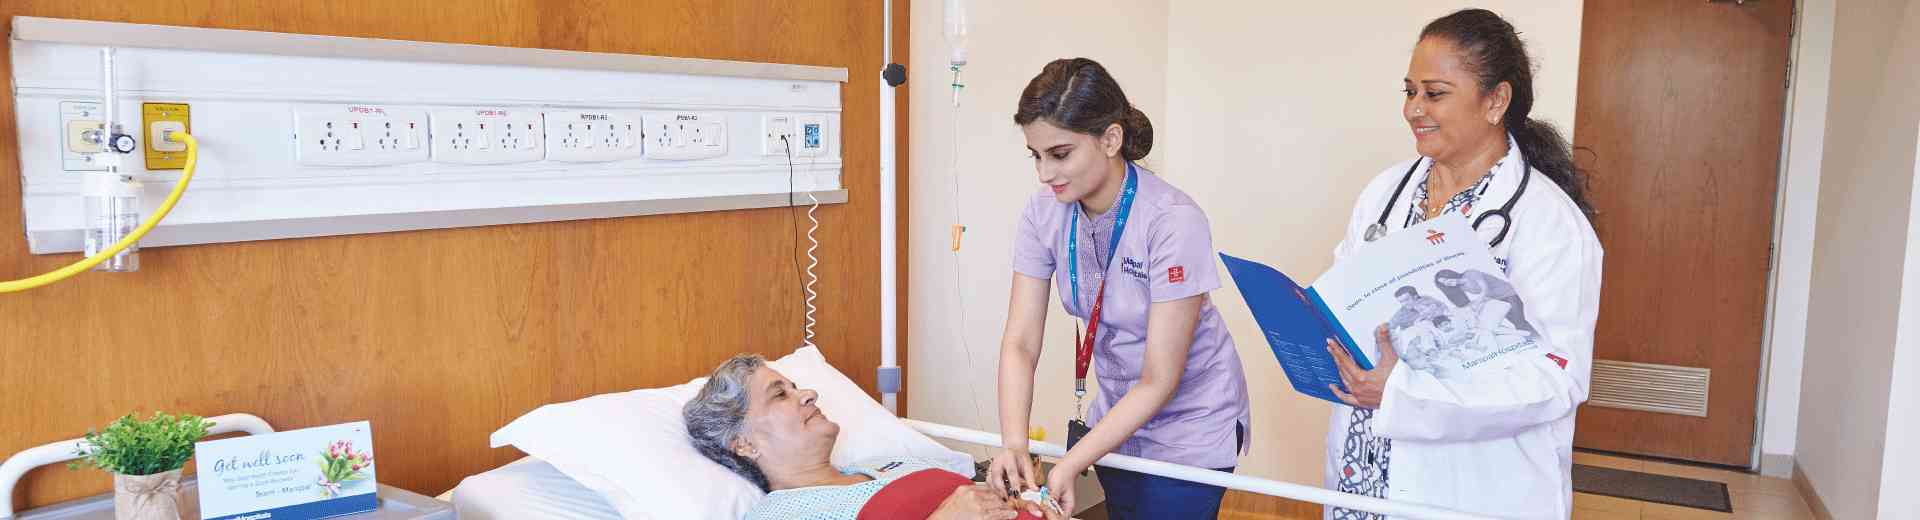 Outpatient and In-Patient Services in Gurgaon